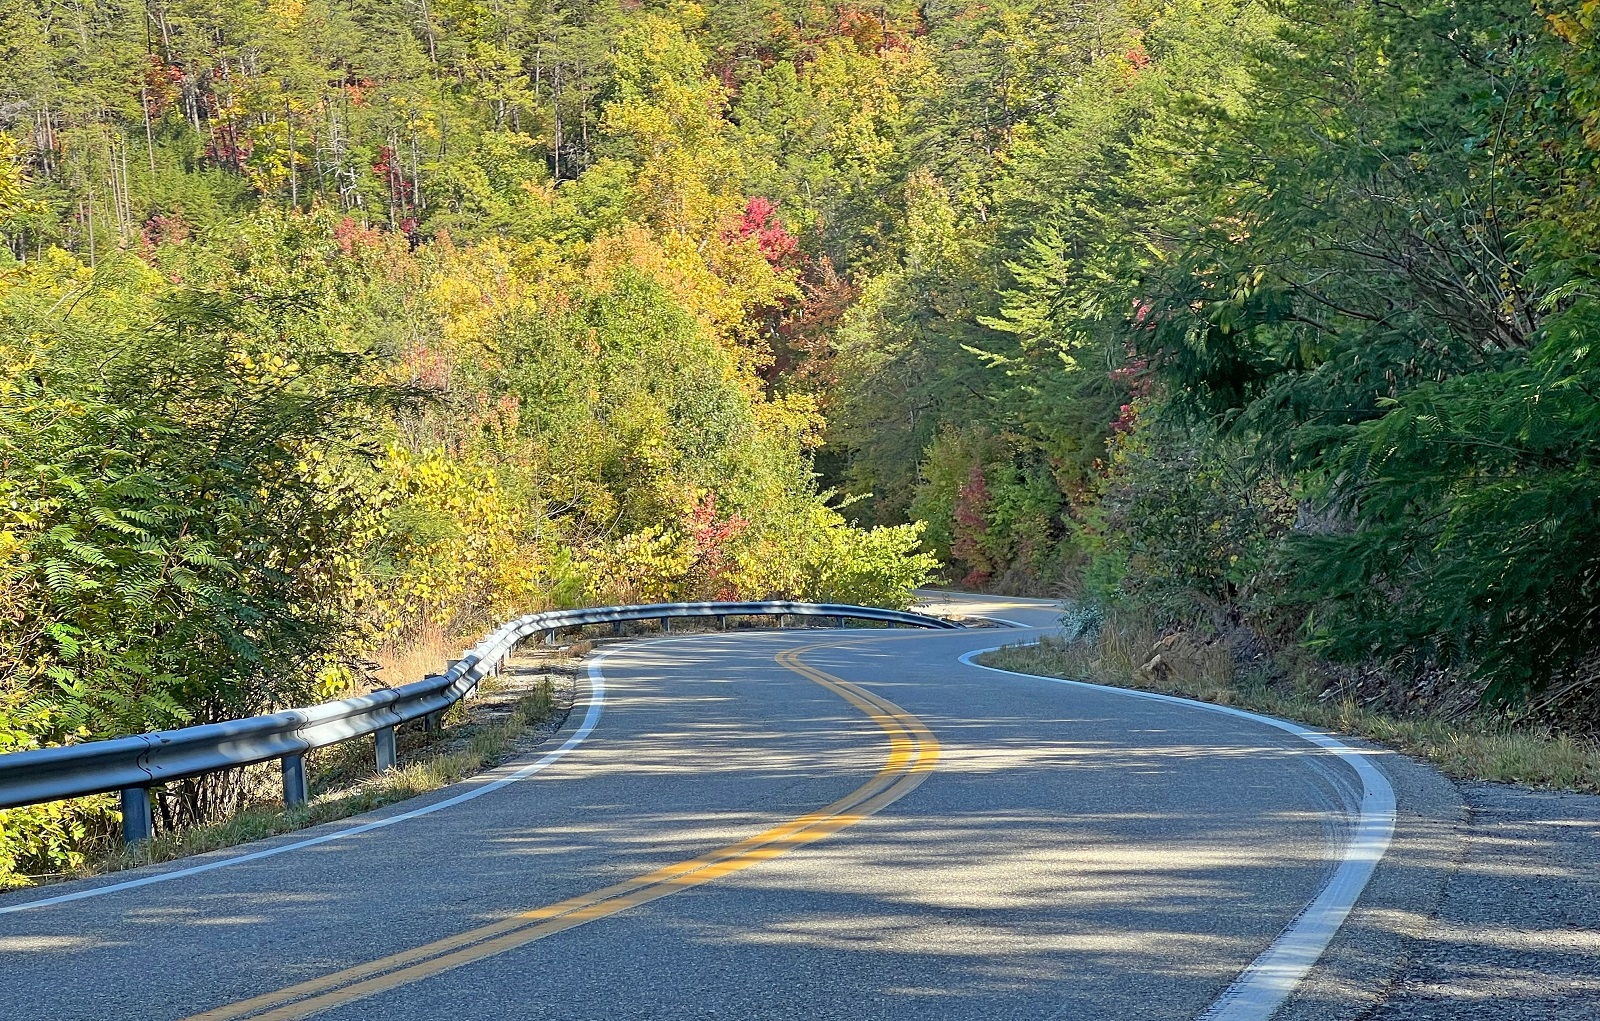 <p class="wp-caption-text">Image Credit: Shutterstock / Melinda Fawver</p>  <p><span>This notorious stretch boasts 318 curves over 11 miles, making it a magnet for motorcyclists seeking the ultimate test of their cornering skills amidst the Smoky Mountains.</span></p>